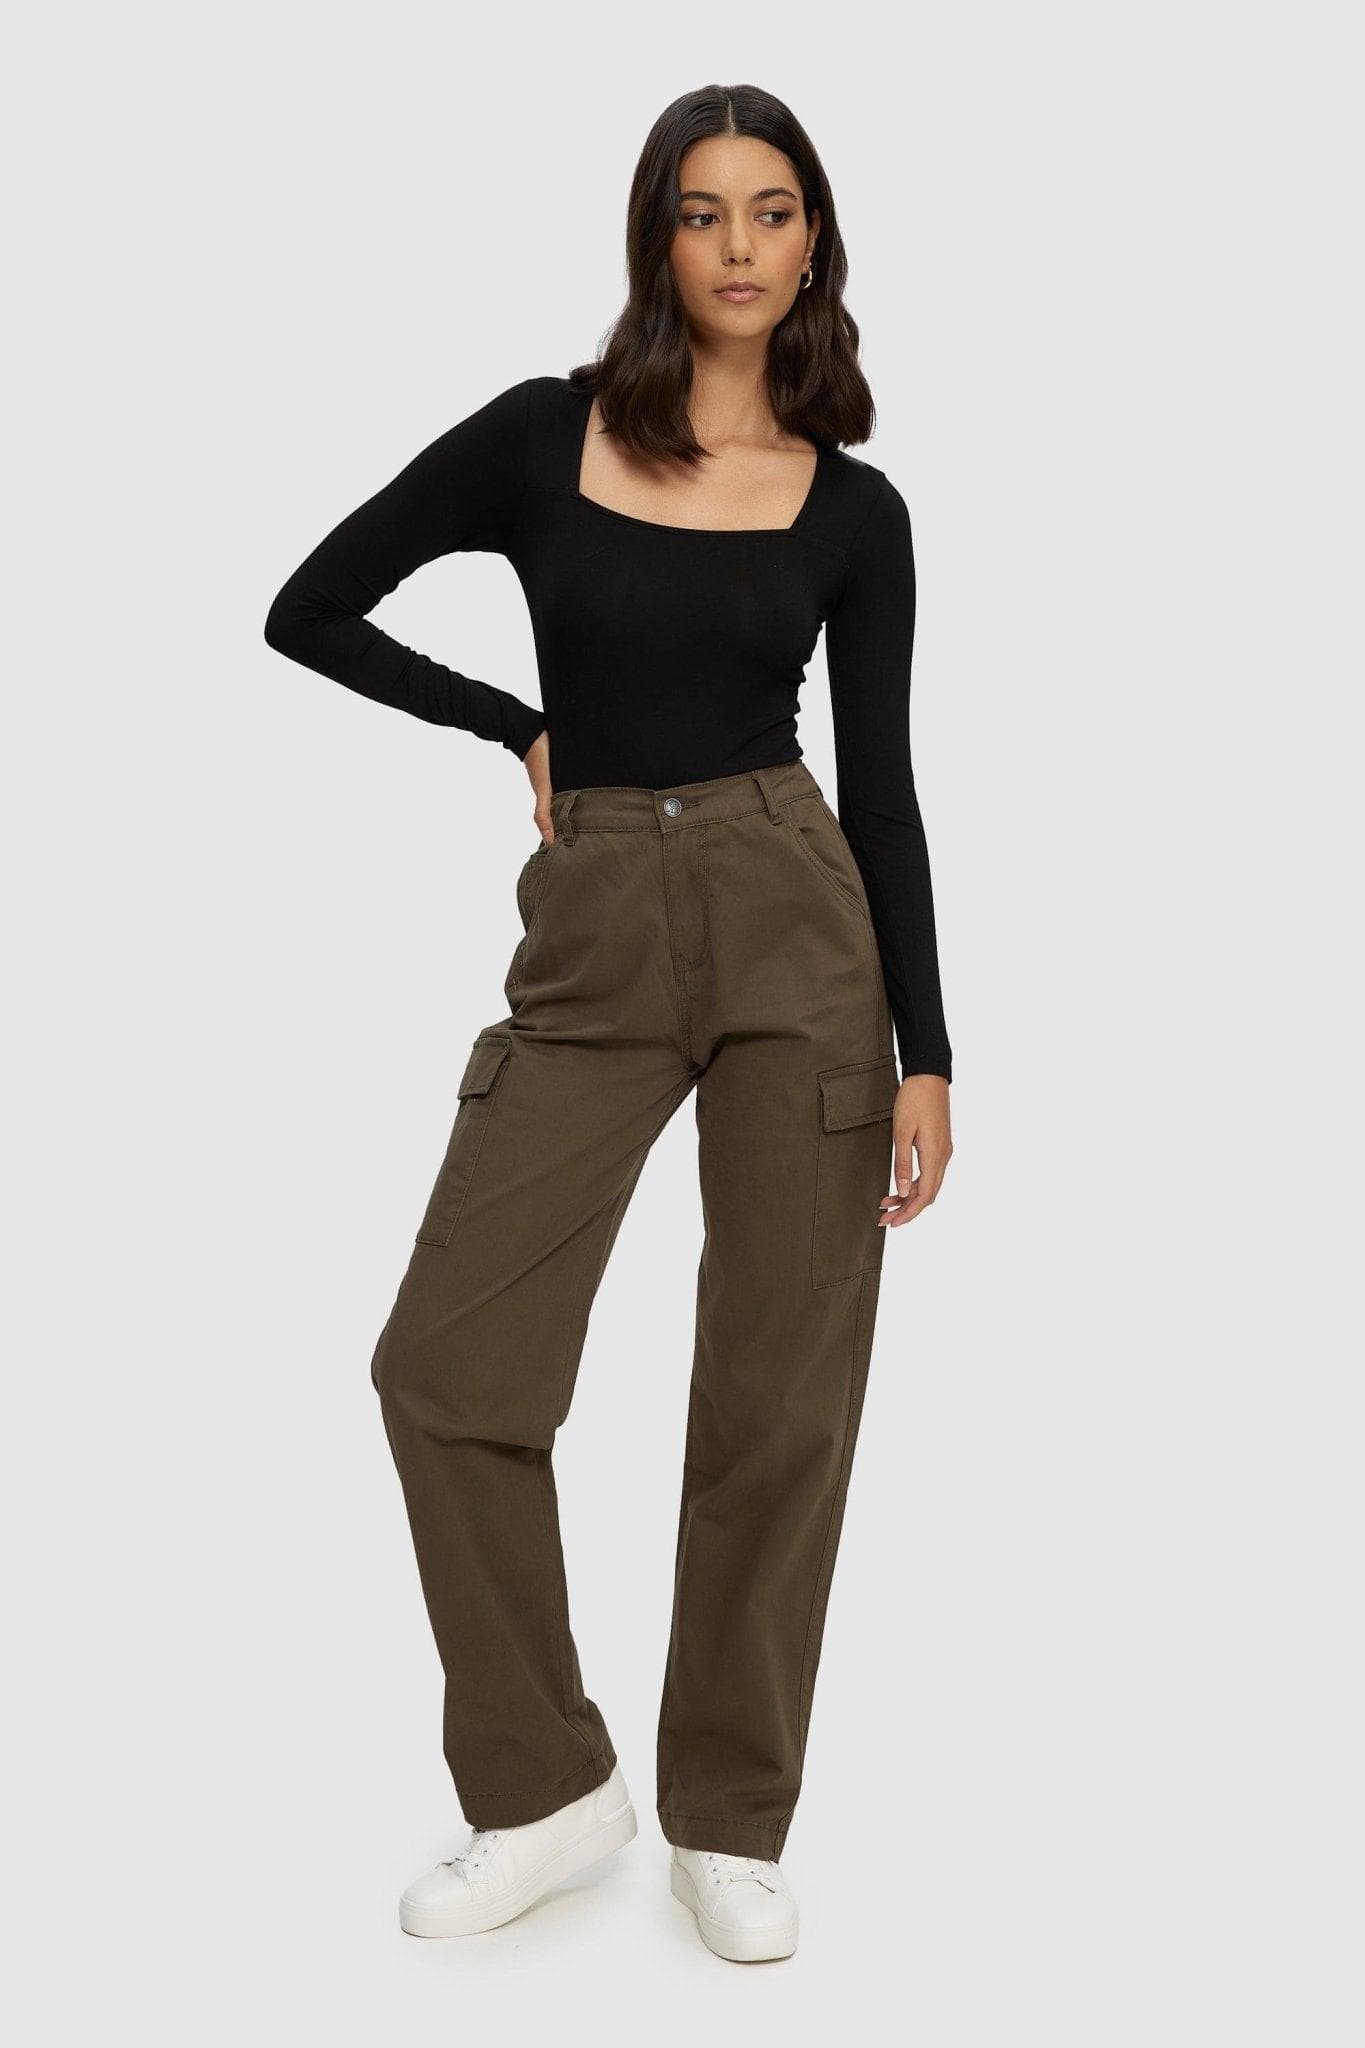 Buy Aahwan Solid Black Wide Leg Baggy with Pockets Cargo Pants for Women's  & Girls' (235-Black-26) at